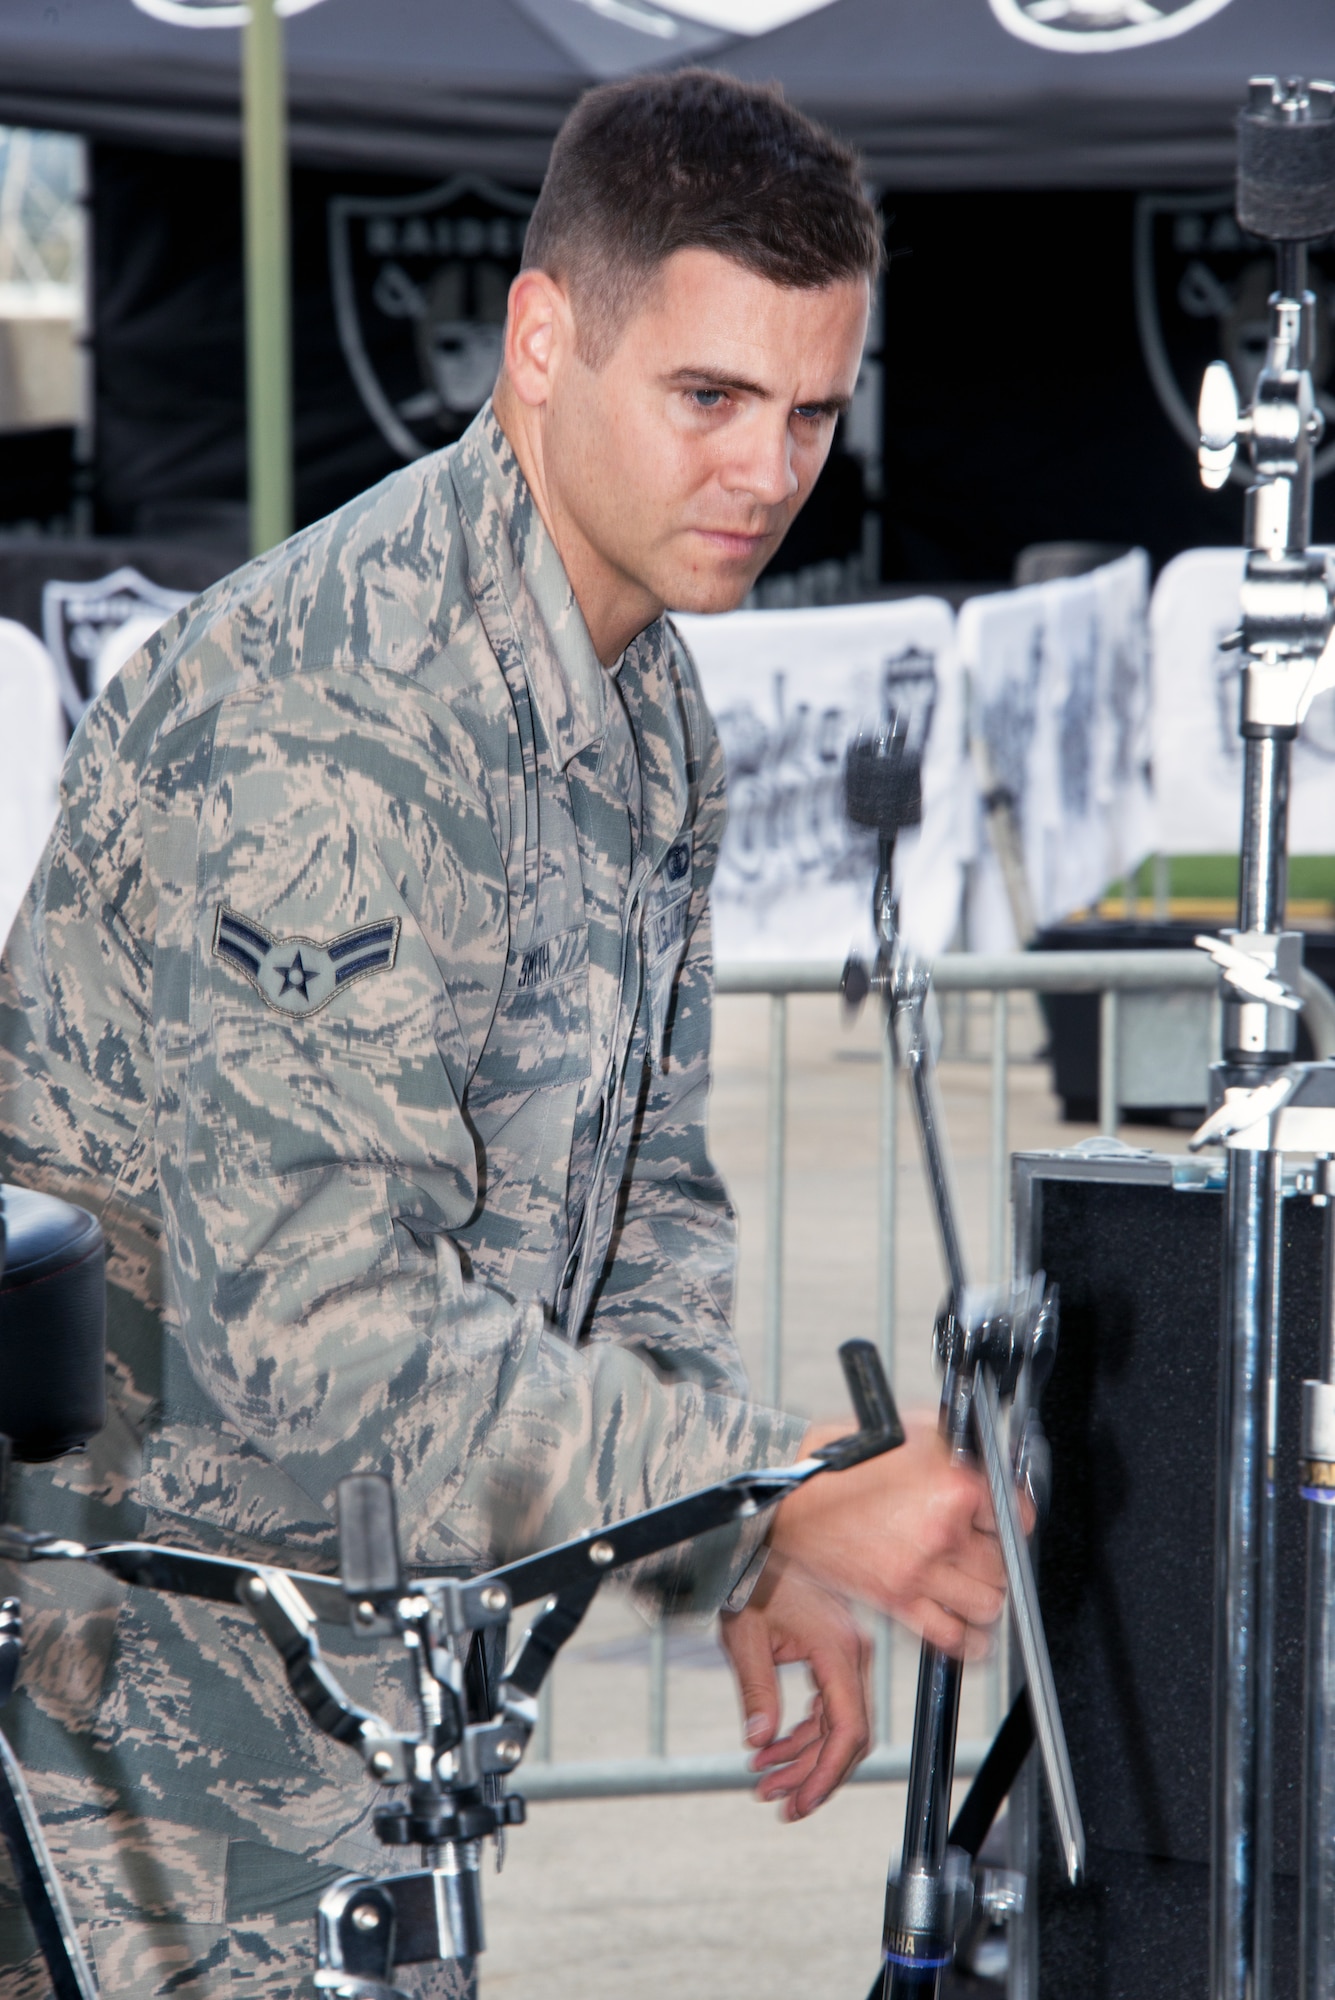 Airman 1st Class Bryan Smith, Air Force Band of the Golden West, sets up his drums before performing during the halftime show of the Oakland Raiders Salute to Service game against the Denver Broncos at the Oakland Coliseum in Oakland Calif., Nov 6, 2016. The band is stationed at Travis Air Force Base, Calif., and performed to a live audience of more than 54,000 fans. The band’s performing groups advance Air Mobility Command and global Air Force missions by providing professional musical products and services for official military, recruiting and community relations events. (U.S. Air Force photo/Louis Briscese)